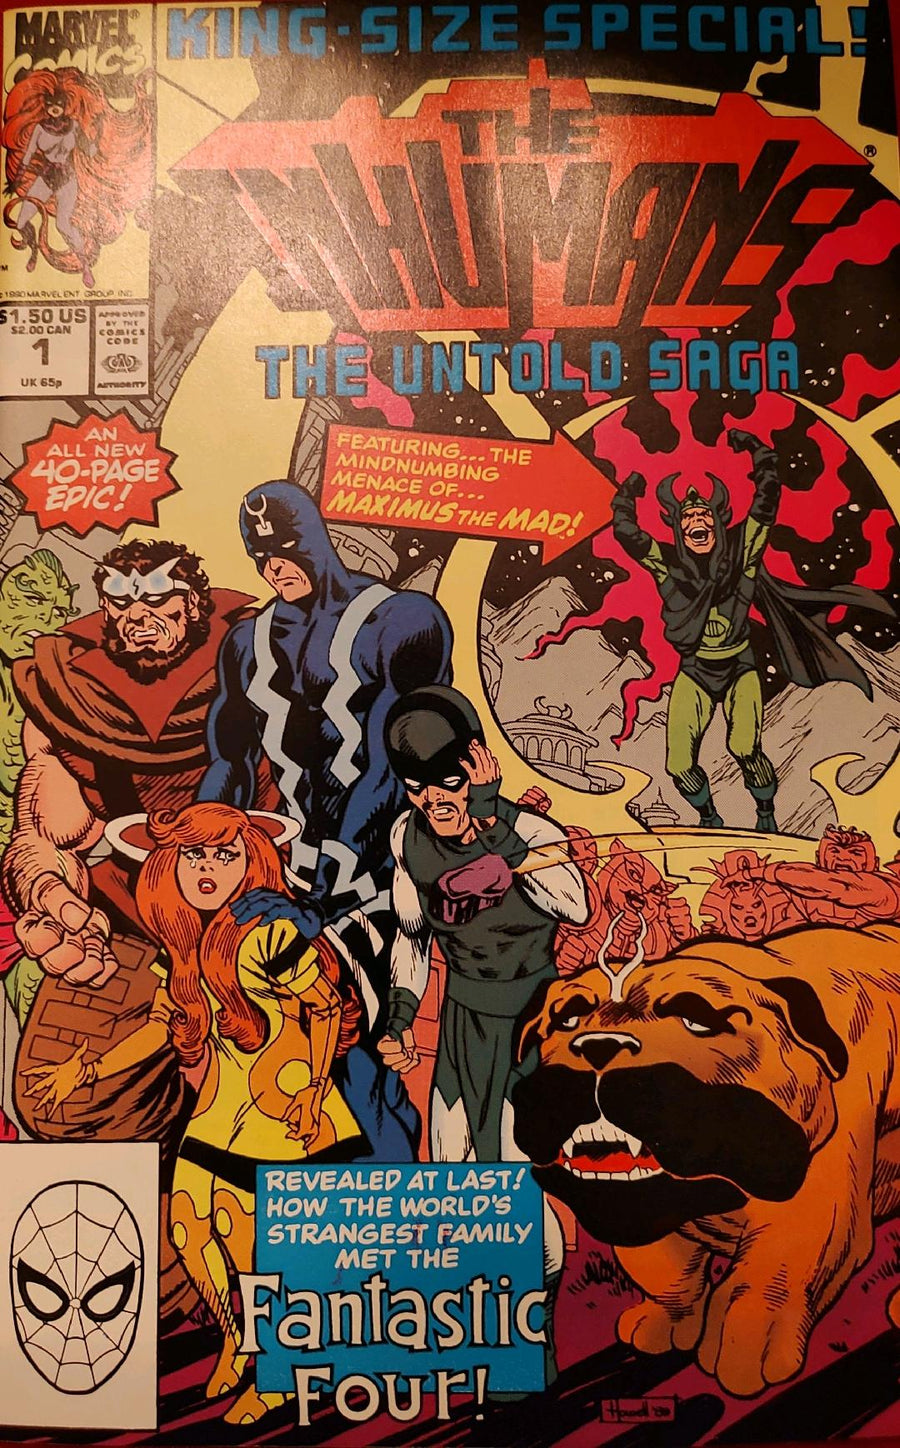 The Inhumans #1 1990 Special Comic Book Cover